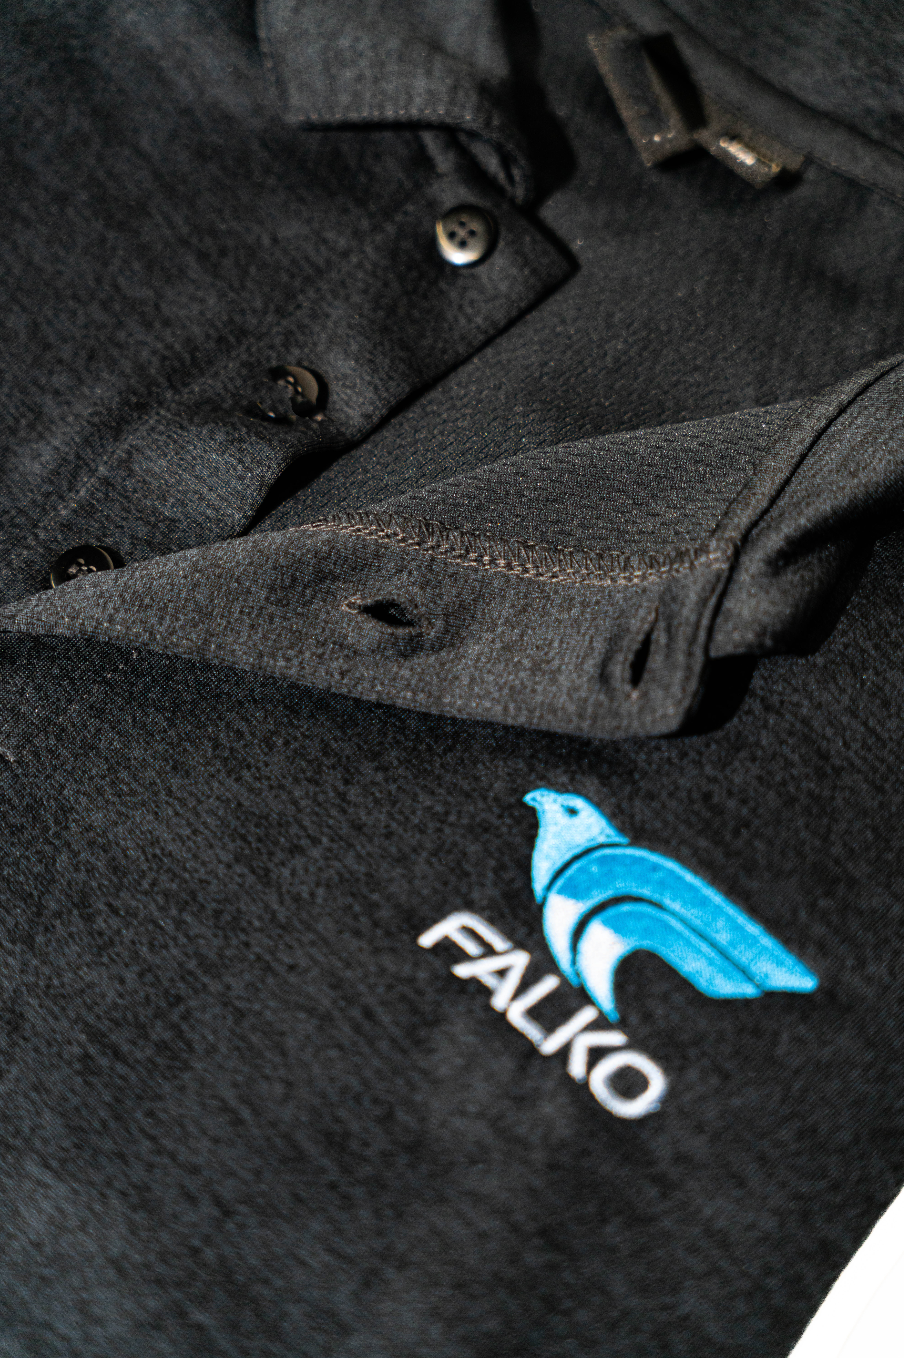 Falko's Midnight Swing: The Perfect Black Polo for Any Golf Game!